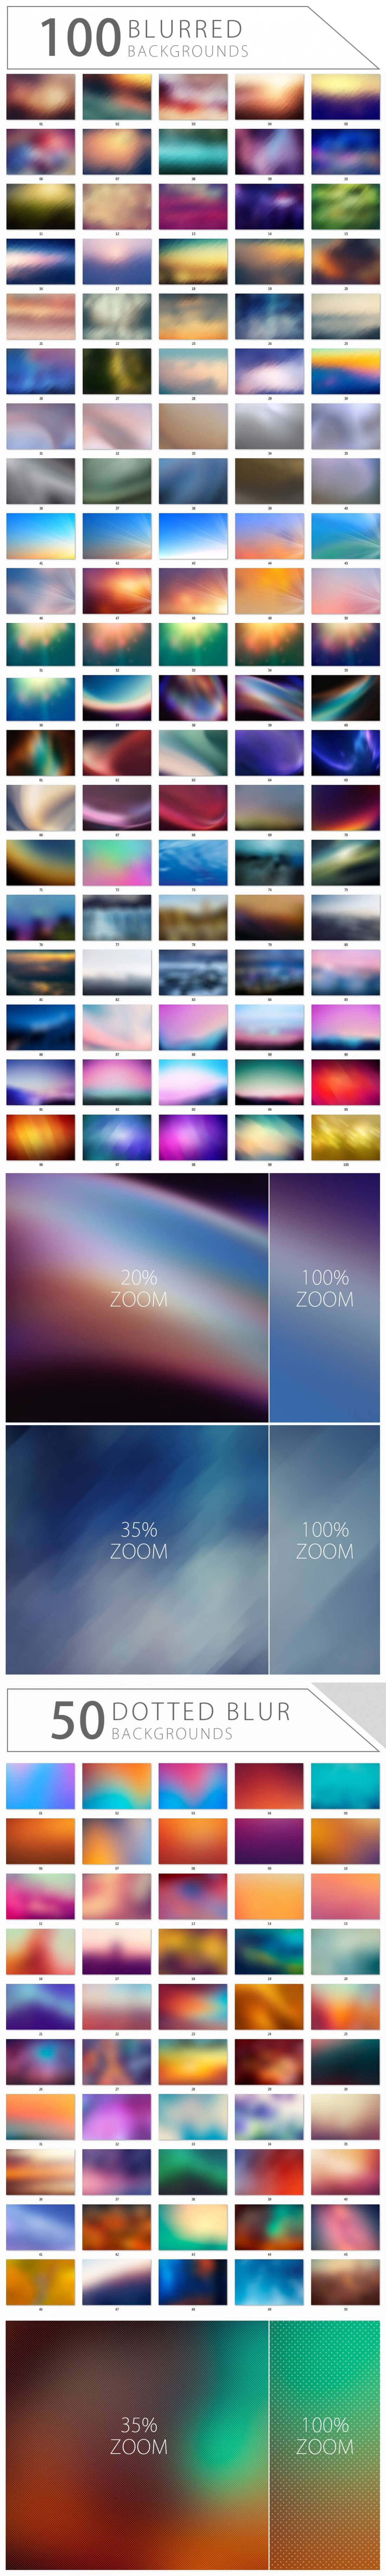 150-Blurred-Dot-Backgrounds-prev-2A